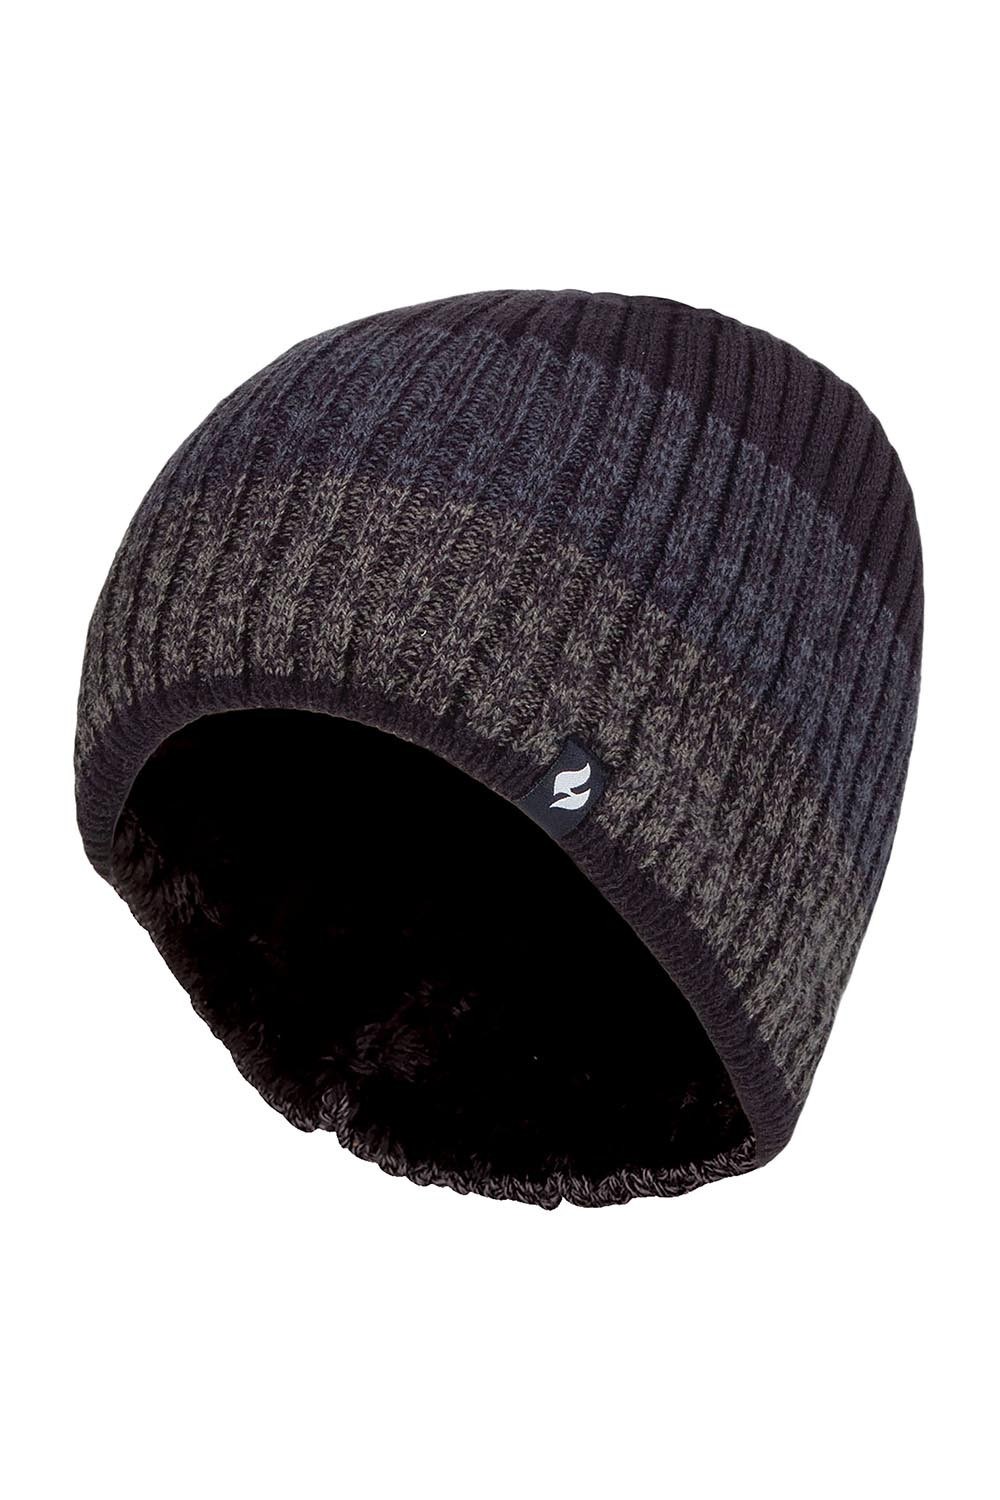 Mens Thermal Striped Winter Beanie -